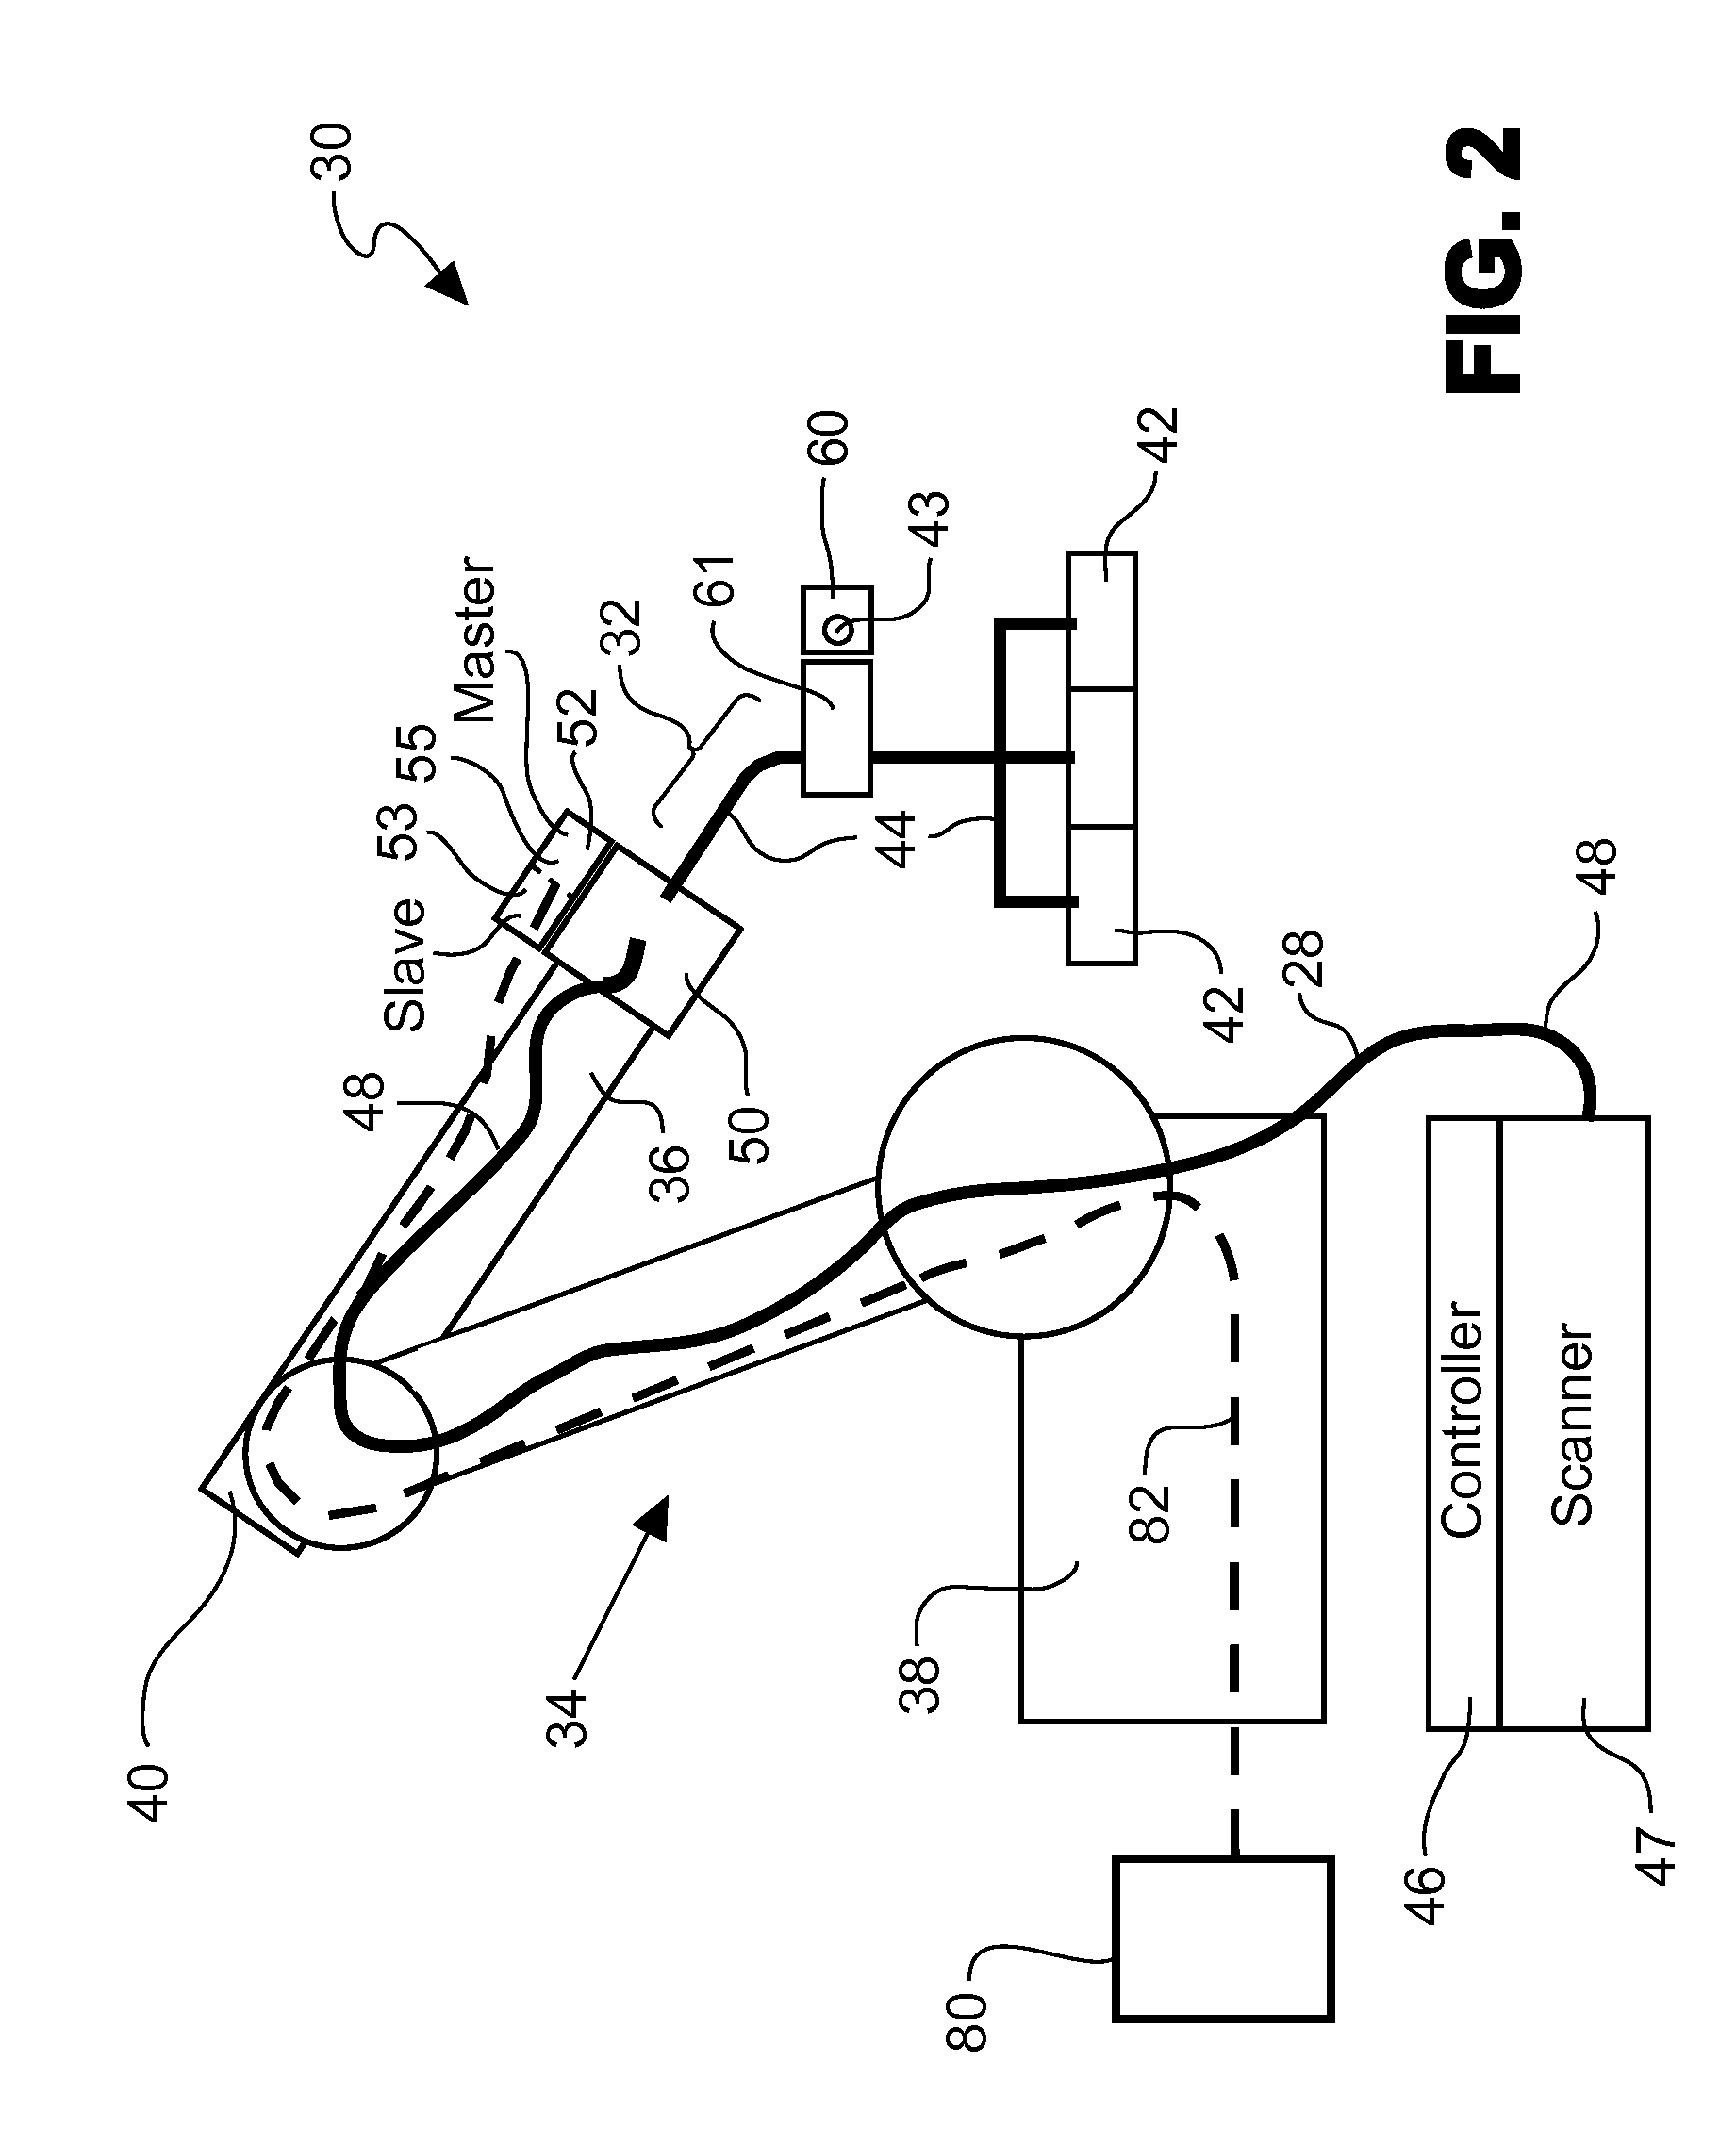 Methods and systems for monitoring the operation of a robotic actuator